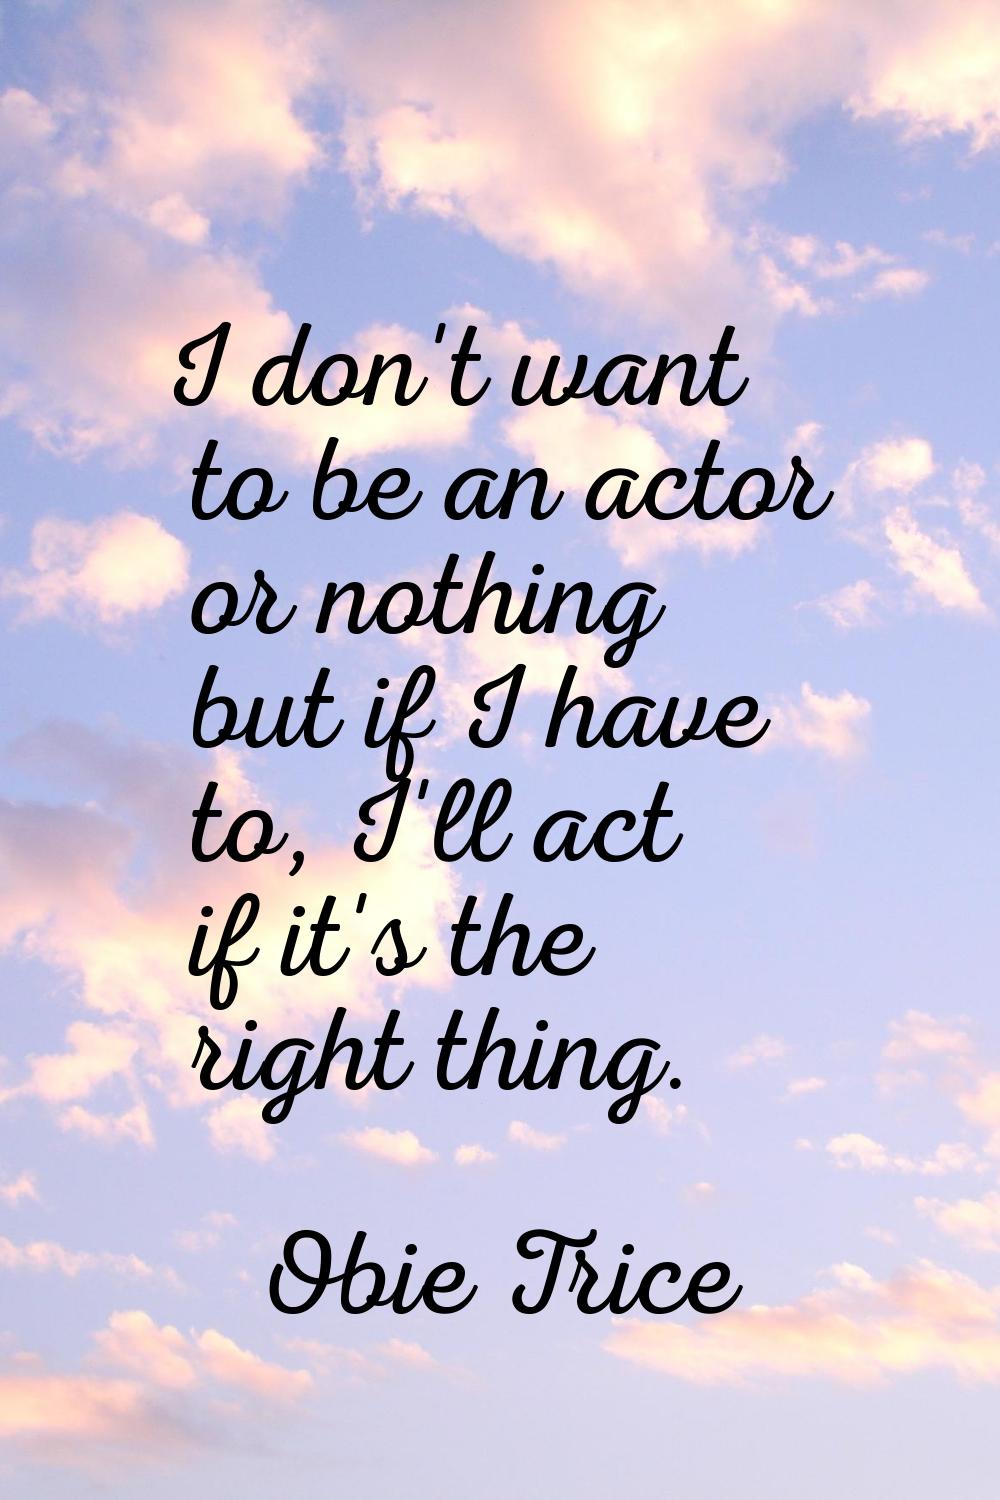 I don't want to be an actor or nothing but if I have to, I'll act if it's the right thing.